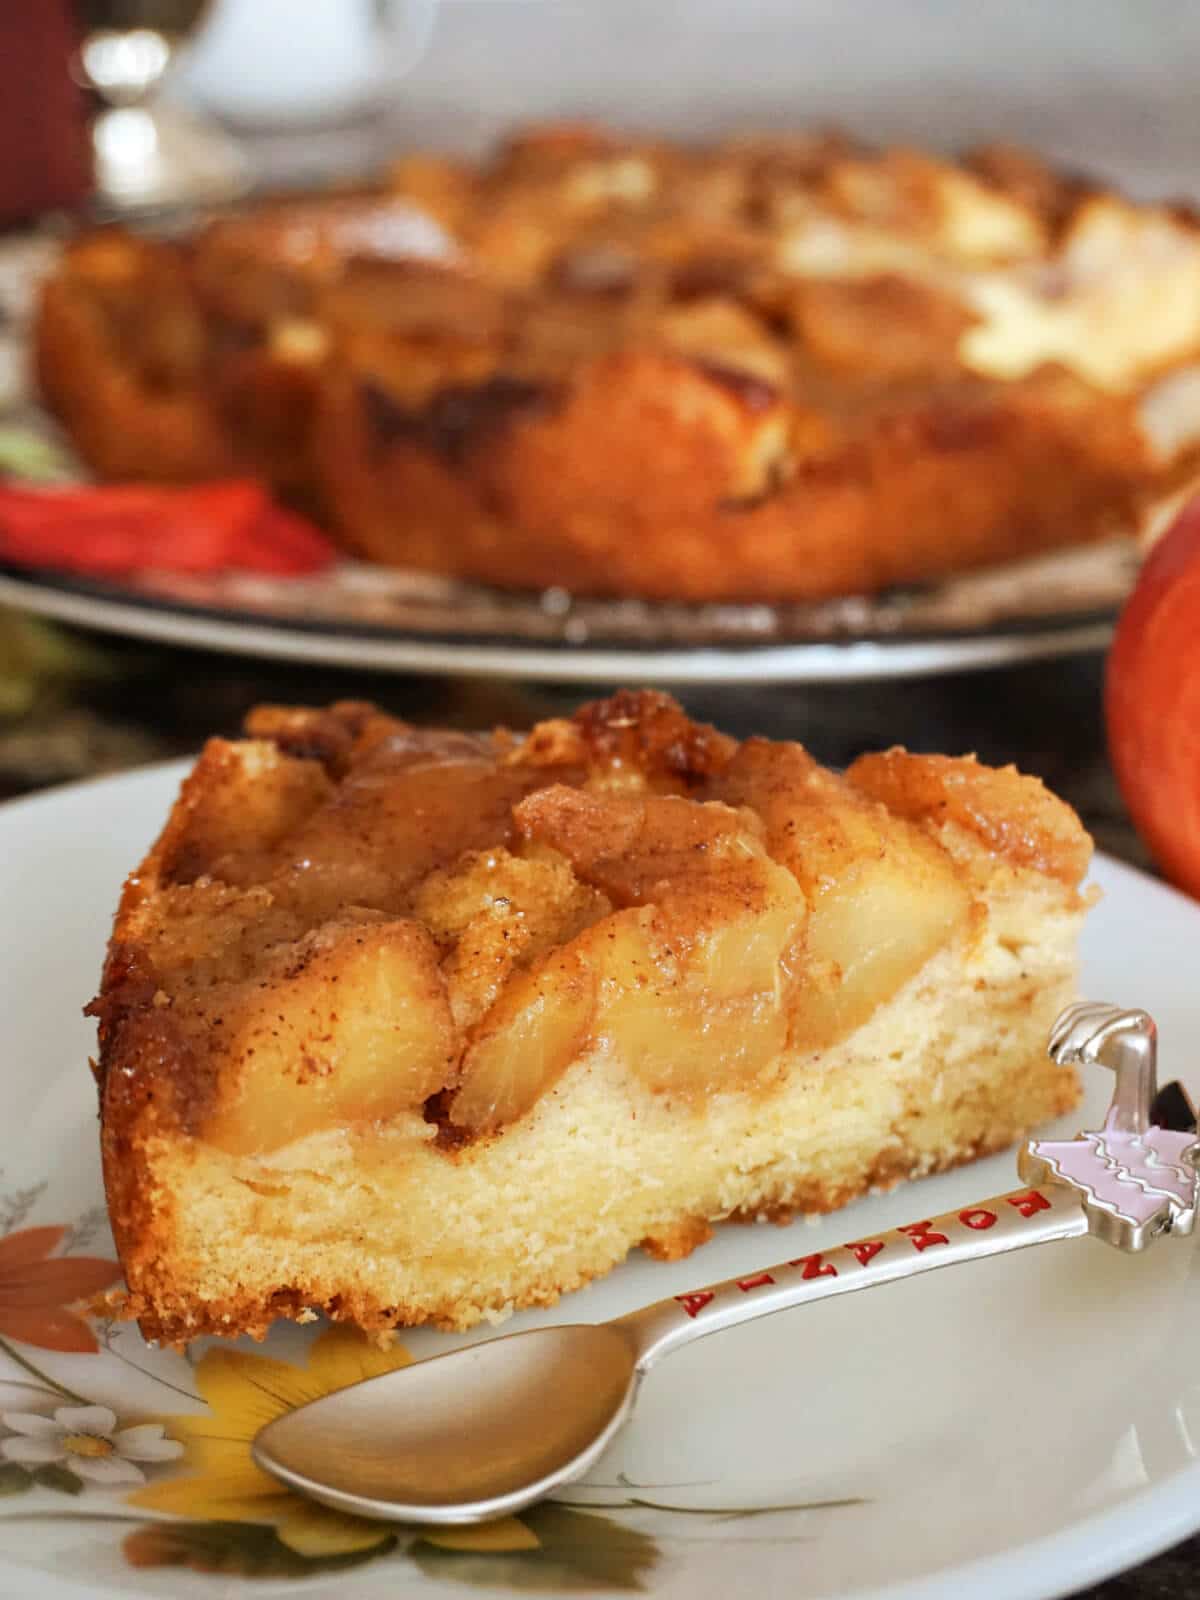 A slice of apple cake on a white plate with more cake in the background.